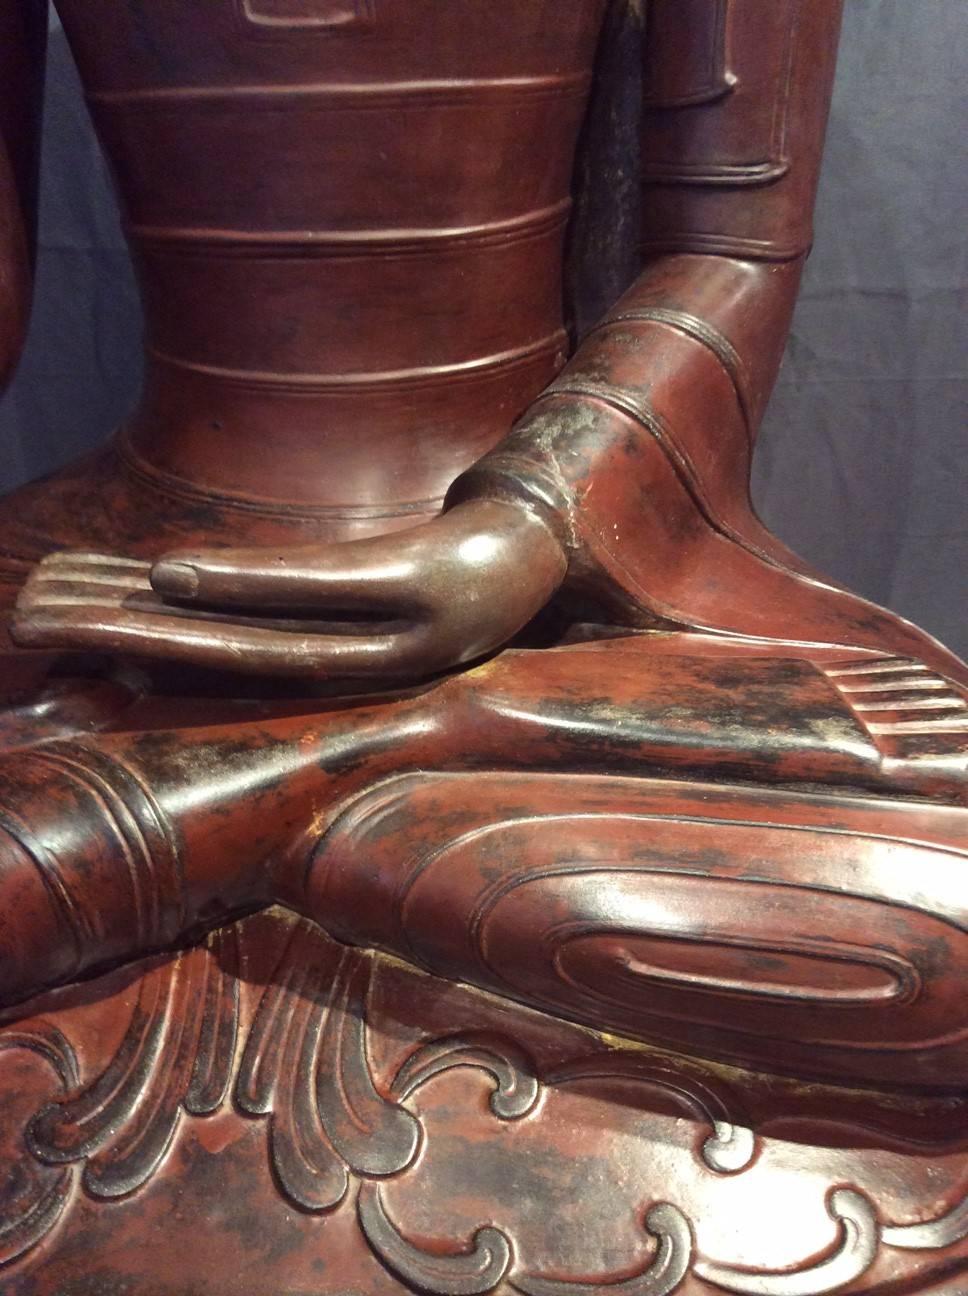 Other Huge Buddha Statue in Lacquer from the Region of Shan, Burma